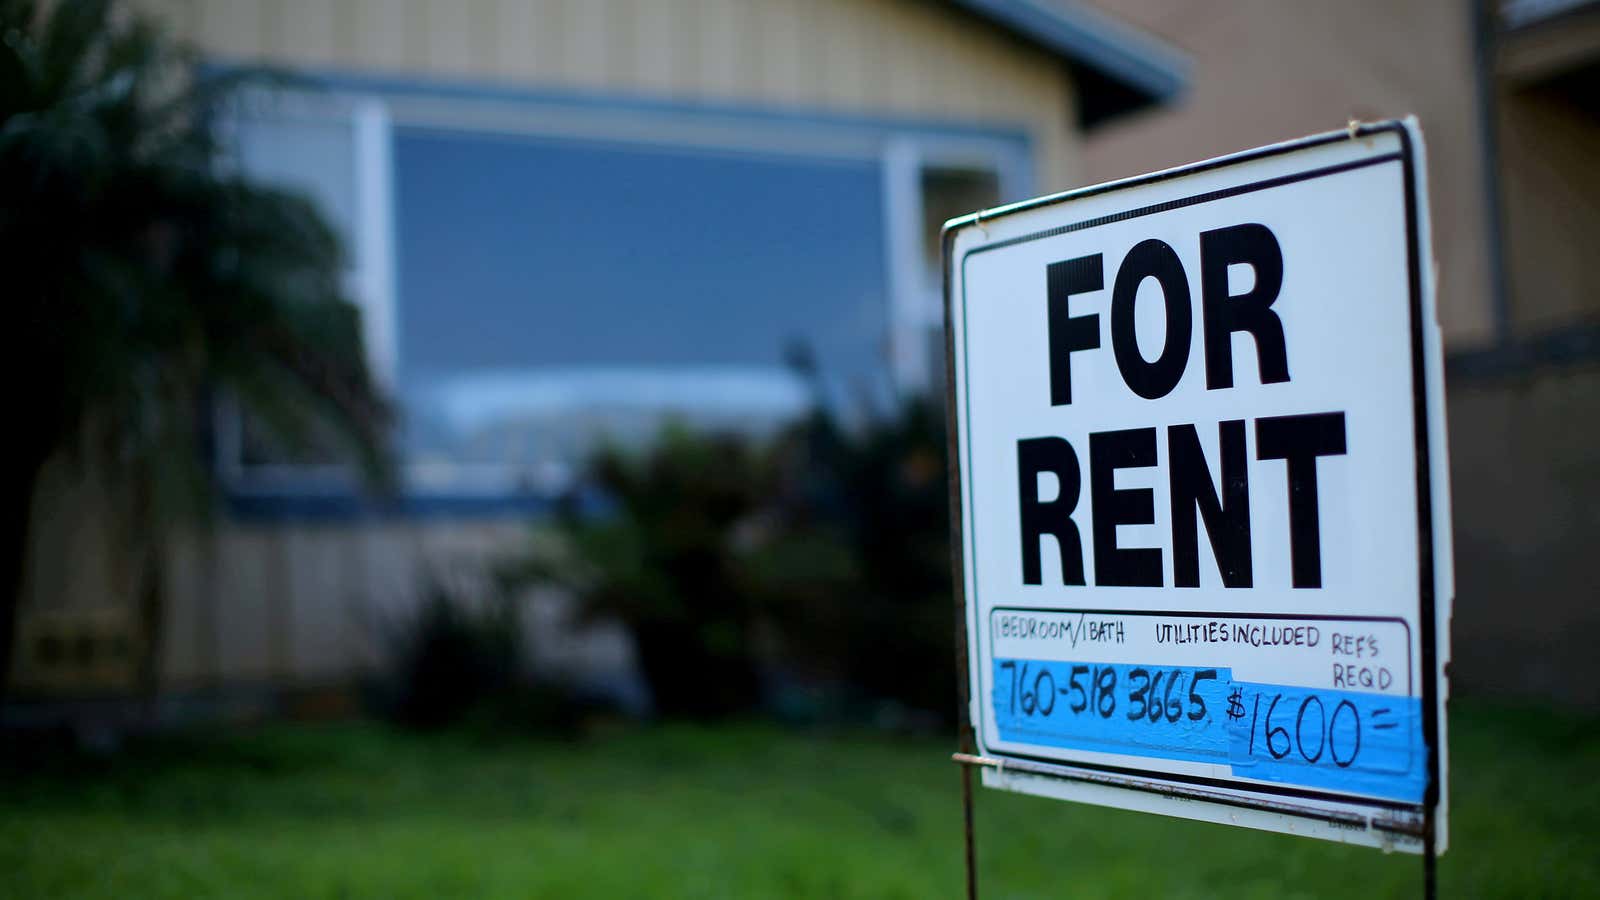 Homes built for renting are cropping up around the US.